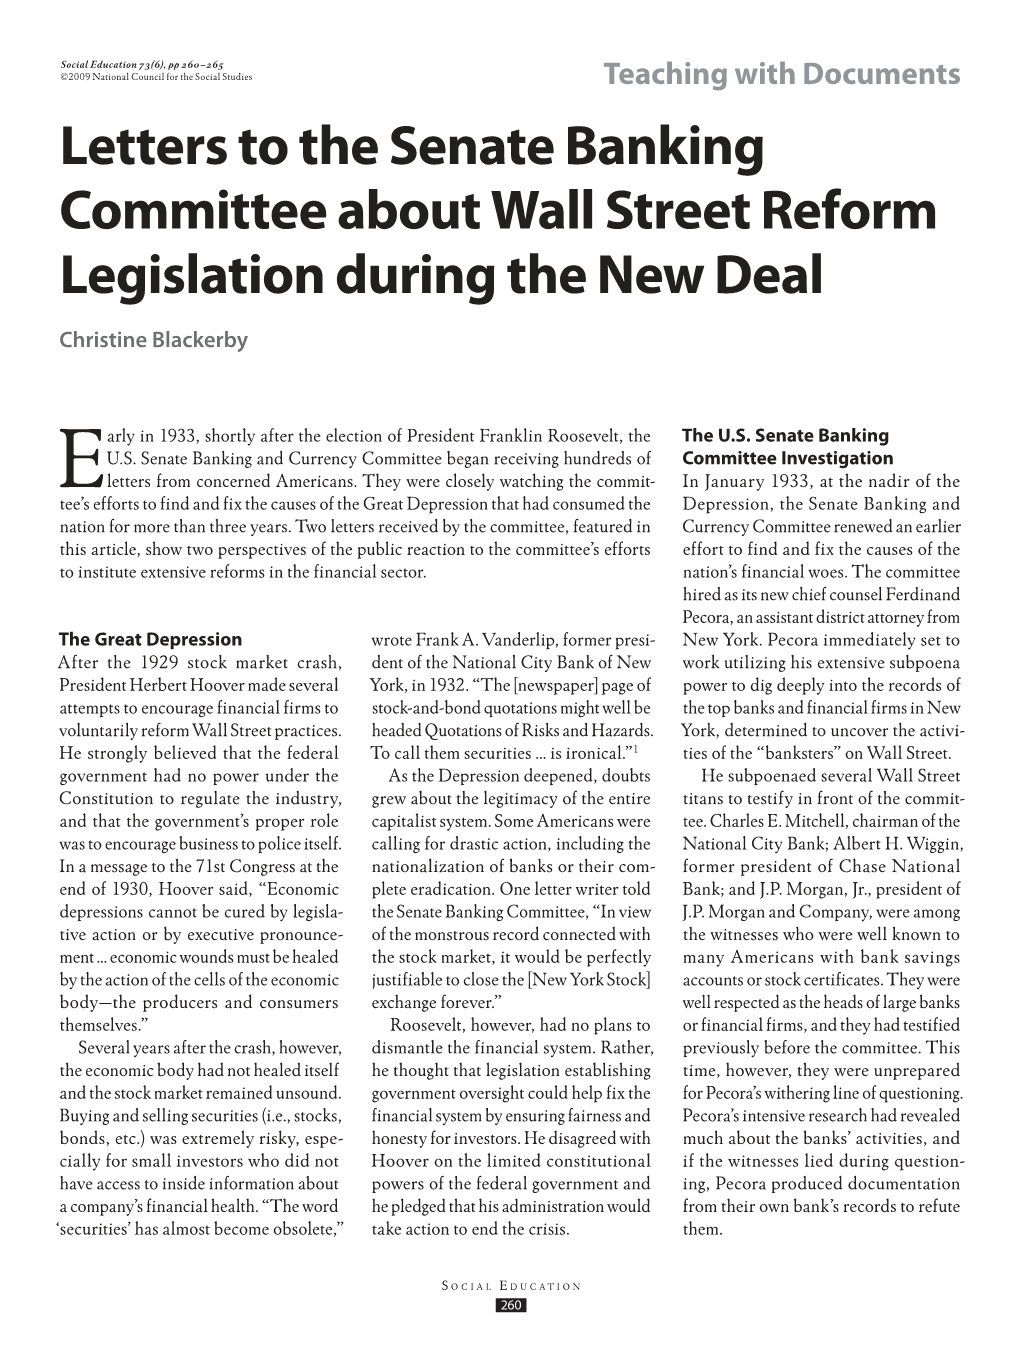 Letters to the Senate Banking Committee About Wall Street Reform Legislation During the New Deal